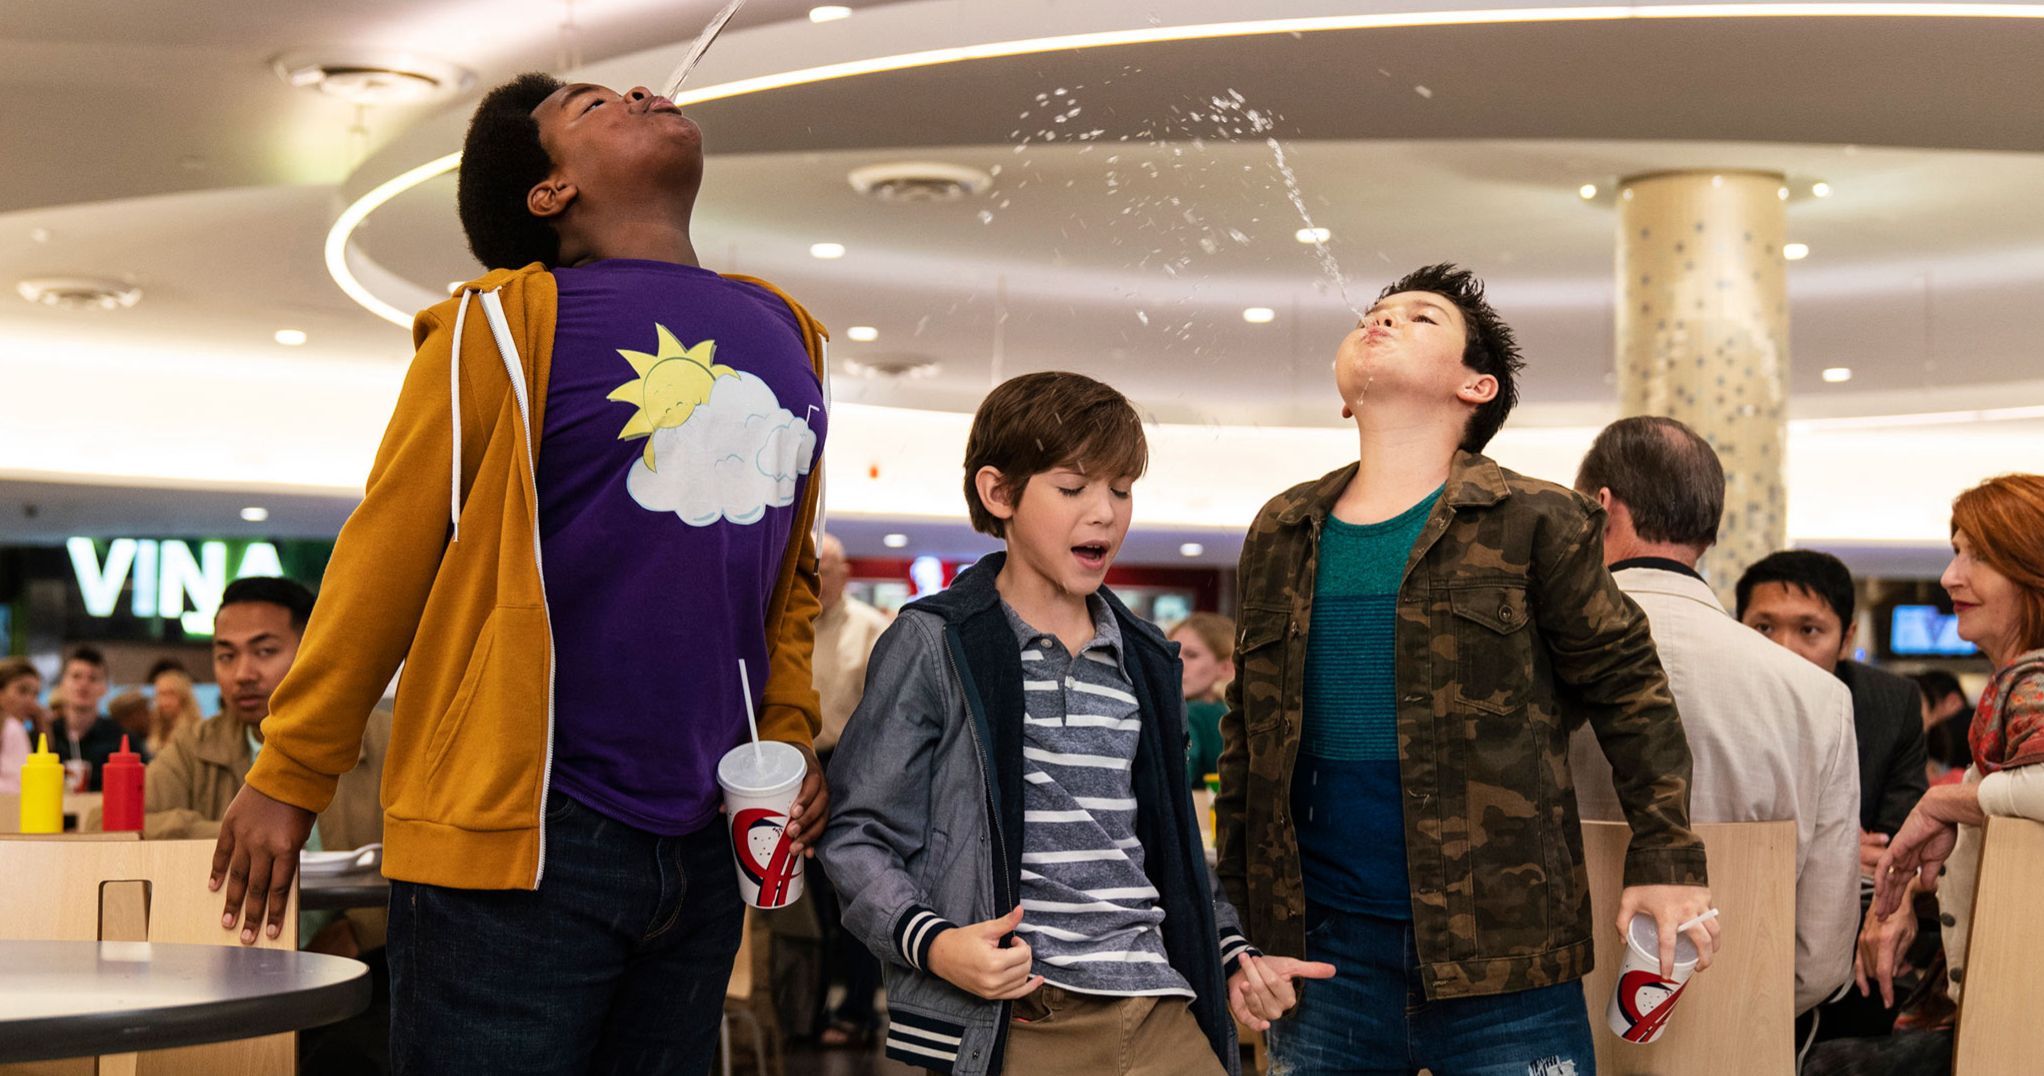 Good Boys Scores Big Win for R-Rated Comedy at This Weekend's Box Office